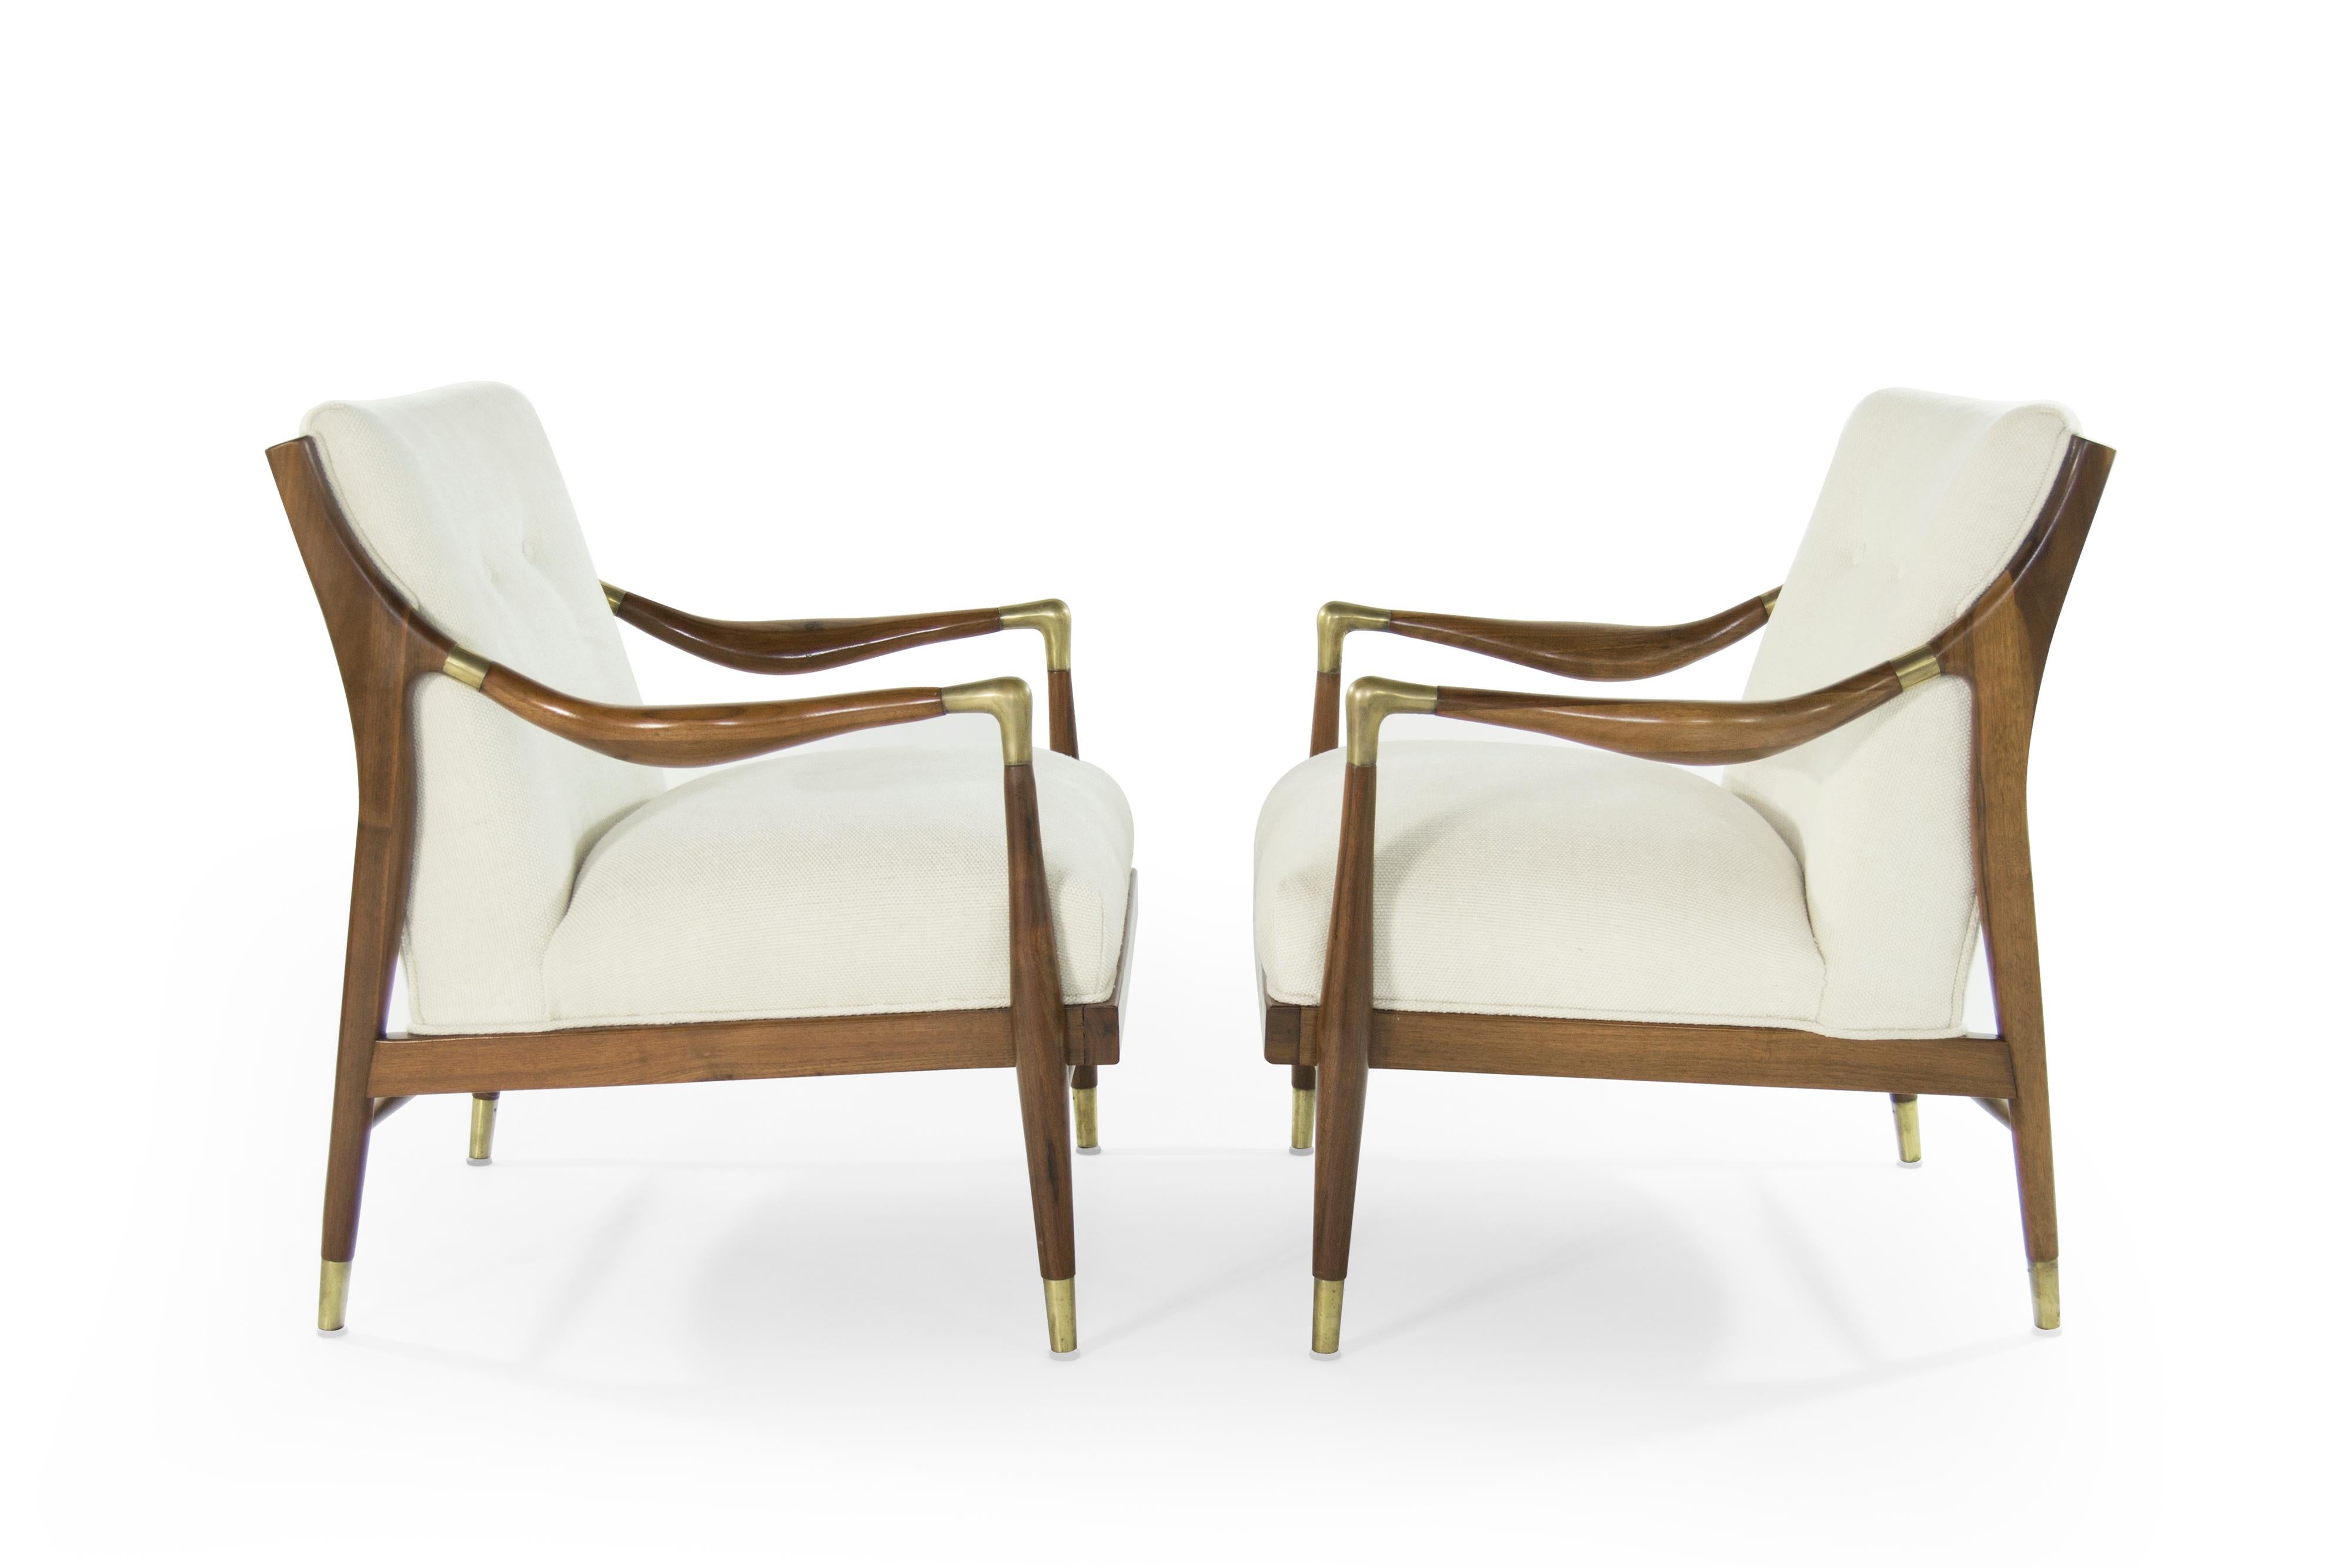 A gorgeous pair of sculptural lounge chairs with brass accents on arms and sabots in the style of Gio Ponti.

Walnut fully restored in a natural finish. Newly upholstered in a off-white twill by Holly Hunt.